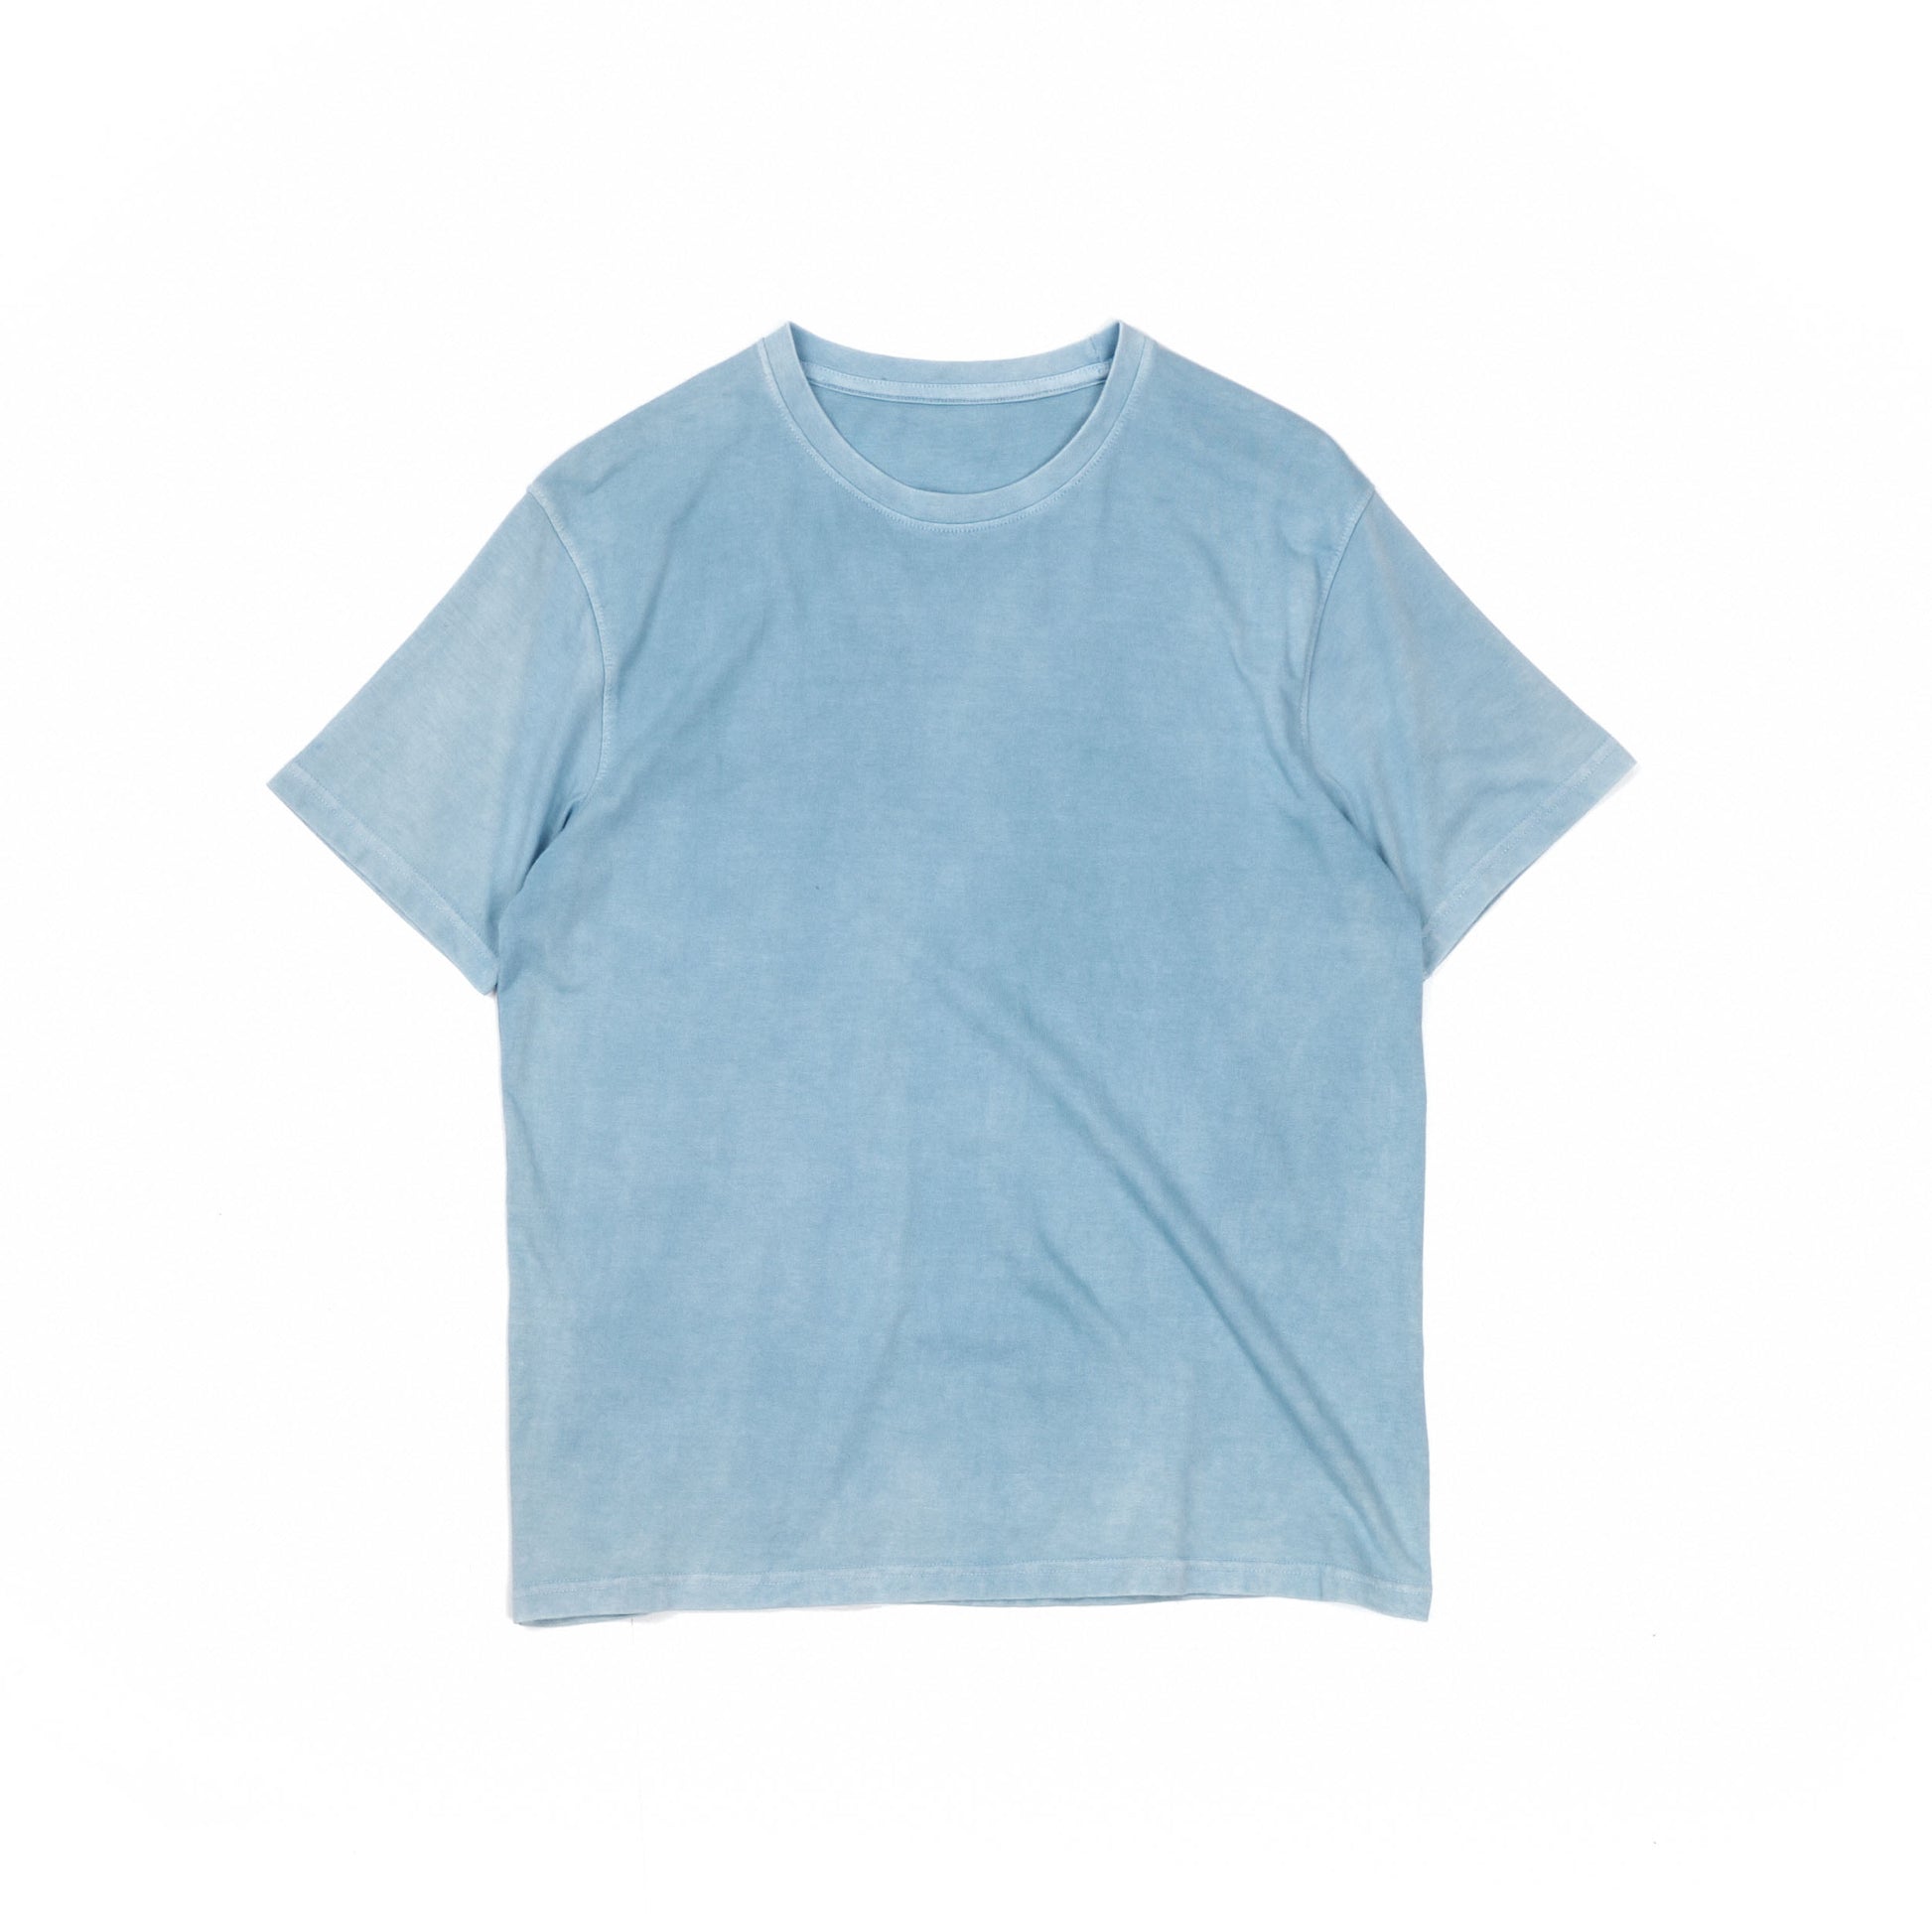 Regular fit organic cotton t-shirt dyed with natural indigo in ice blue colour